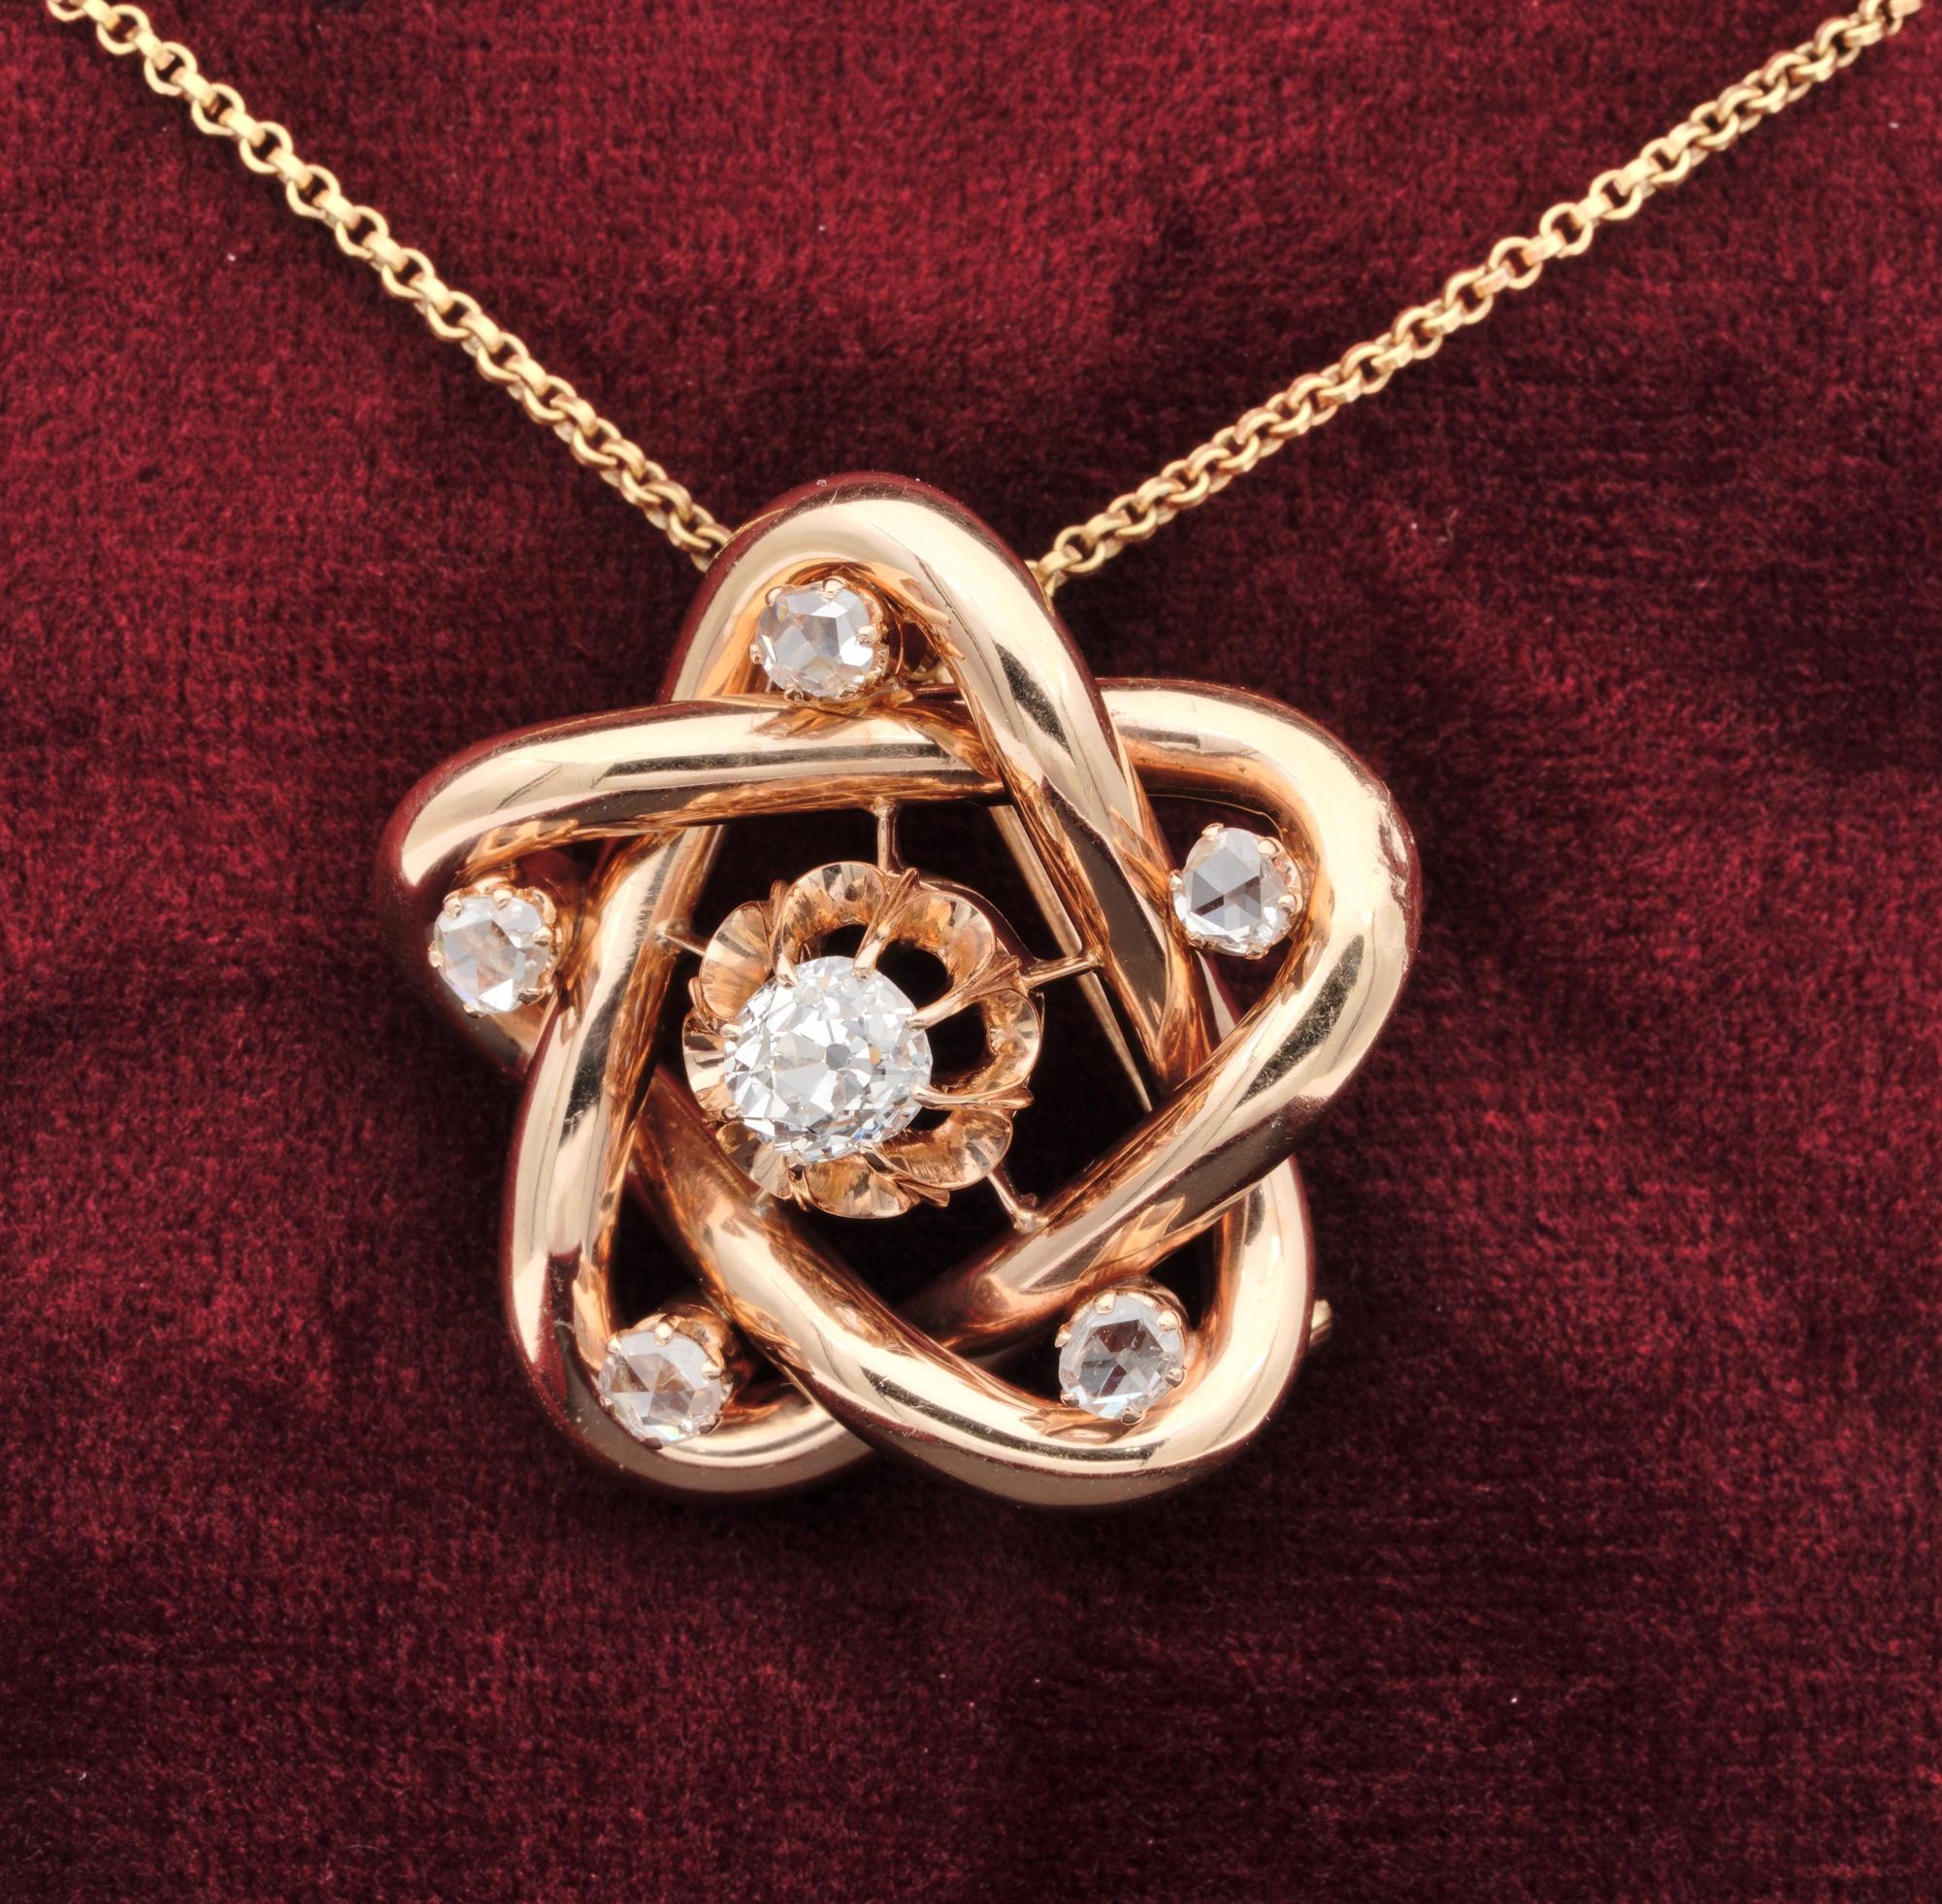 °Symbol of Love °
Love knot has origins that go far back in time
Knot design has been found in Celtic artwork, carved sculptures from the ancient Egyptians, and also ancient Greek jewellery
This beautiful Victorian example has been hand fabricated